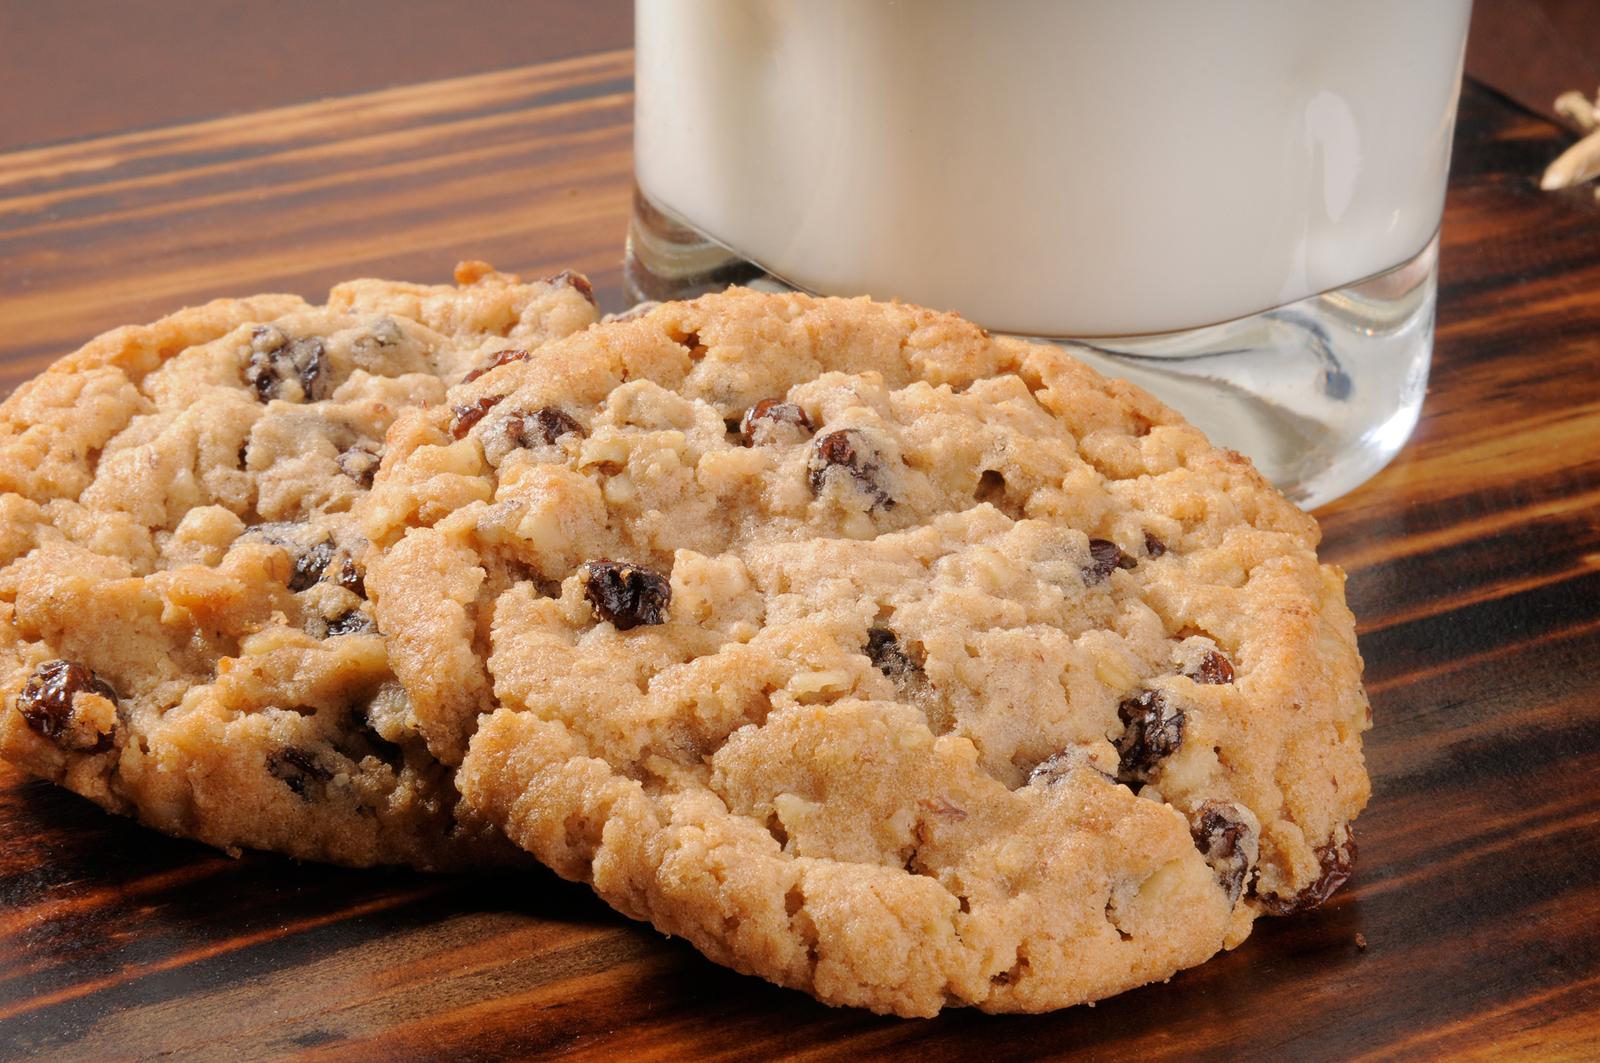 Choose your favorite recipe and take time to bake some delicious cookies this month (Photo Credit: BigStockPhoto.com)